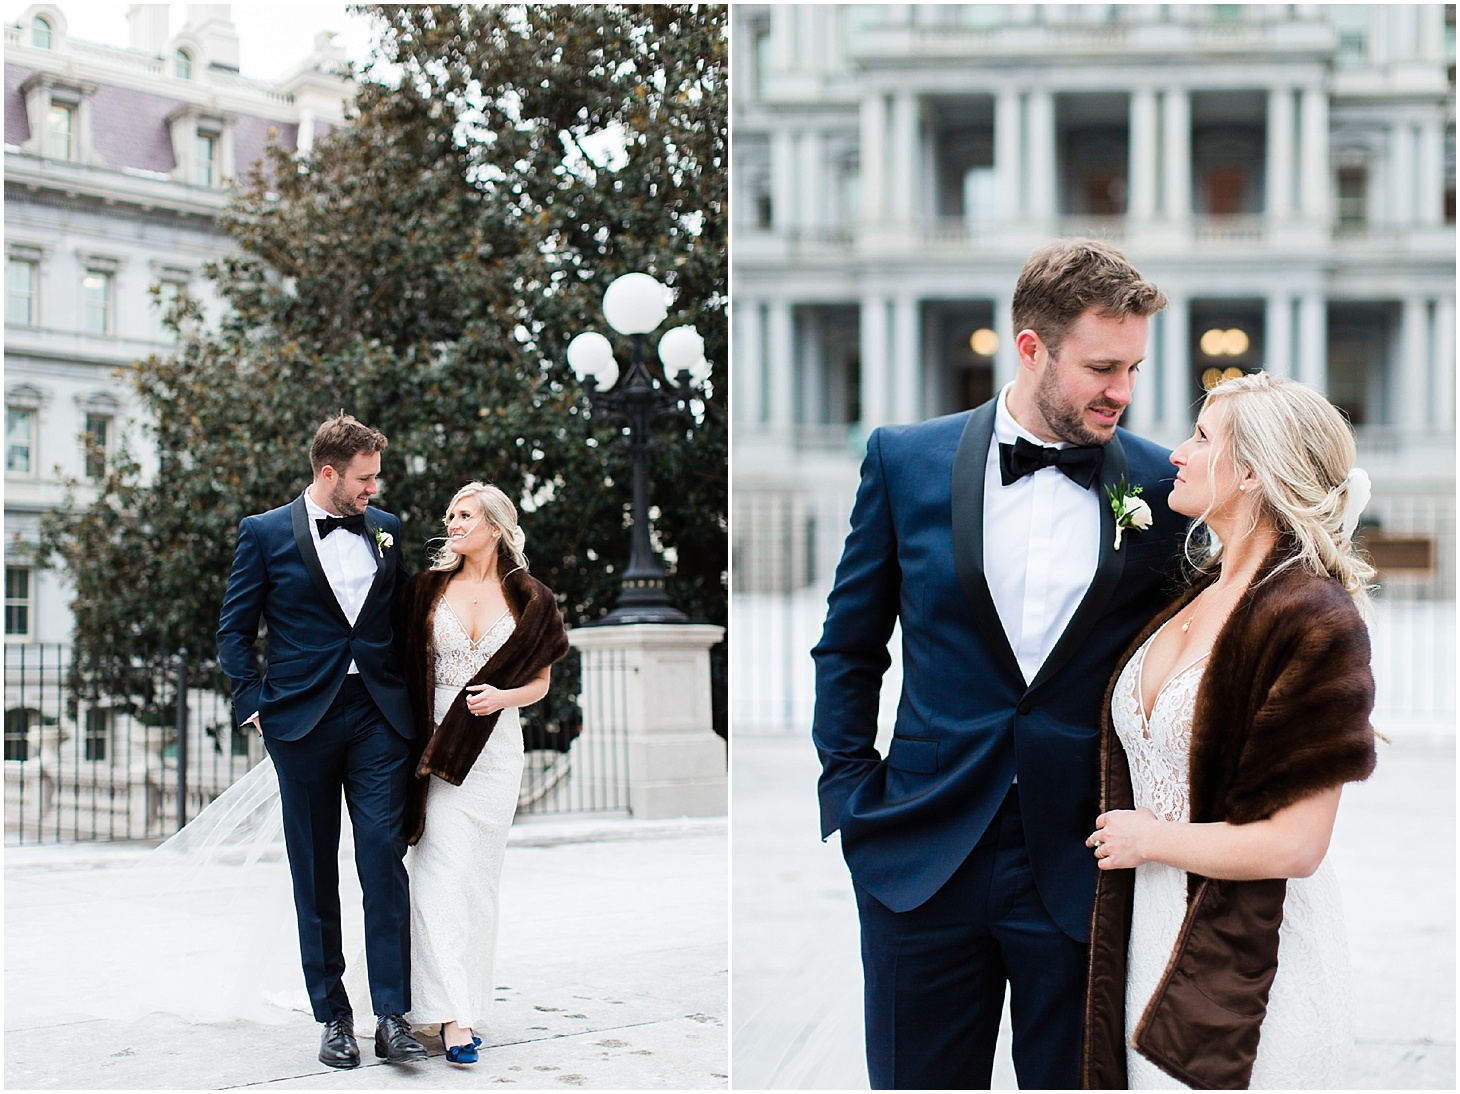 Wedding Portraits at the Eisenhower Executive Office Building | French-Inspired New Years Eve Wedding at the Decatur House | Sarah Bradshaw Photography | Washington DC Wedding Photographer